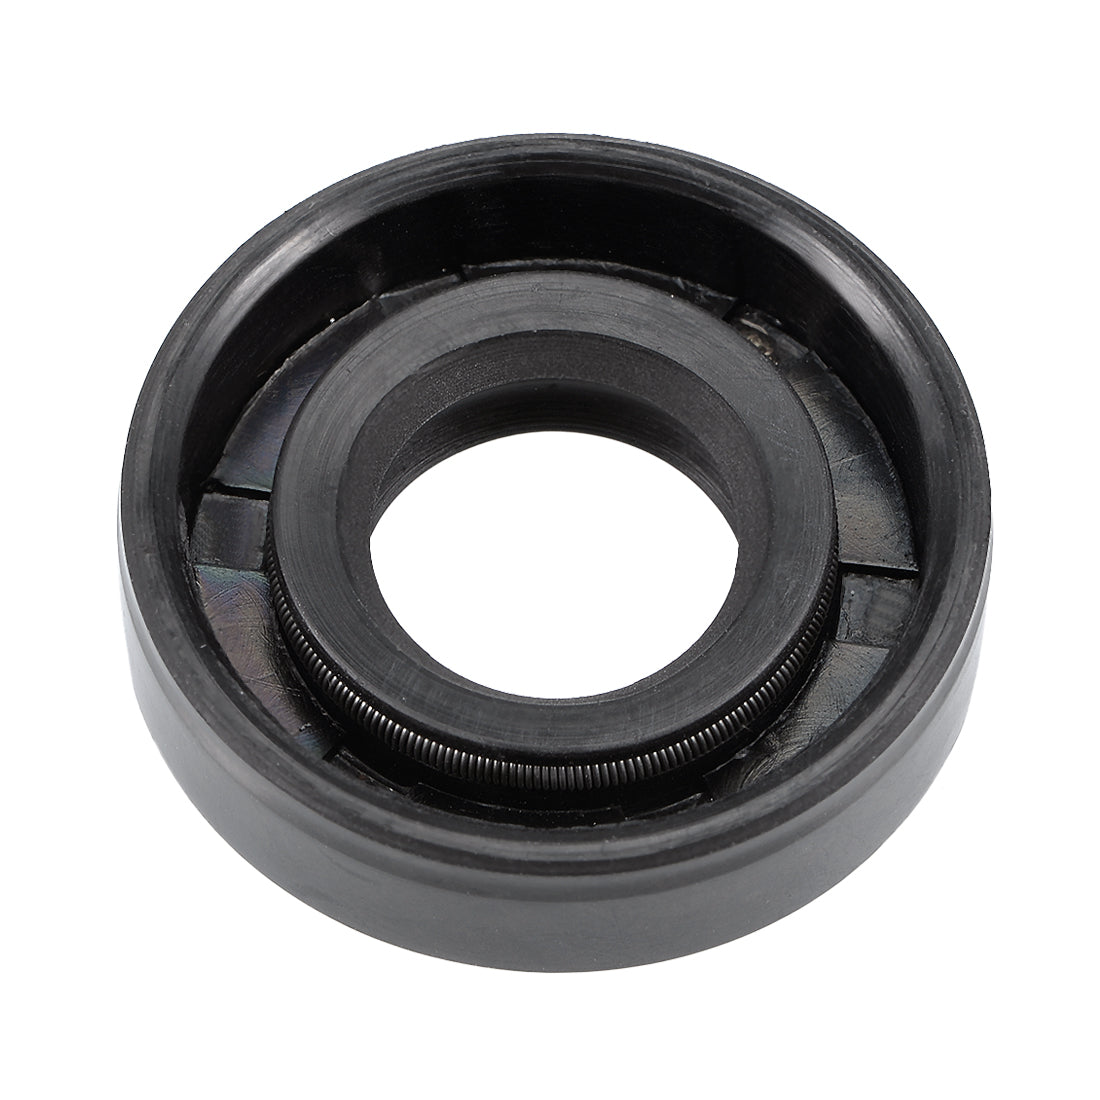 Uxcell Uxcell Oil Seal, TC 14mm x 28mm x 7mm, Nitrile Rubber Cover Double Lip